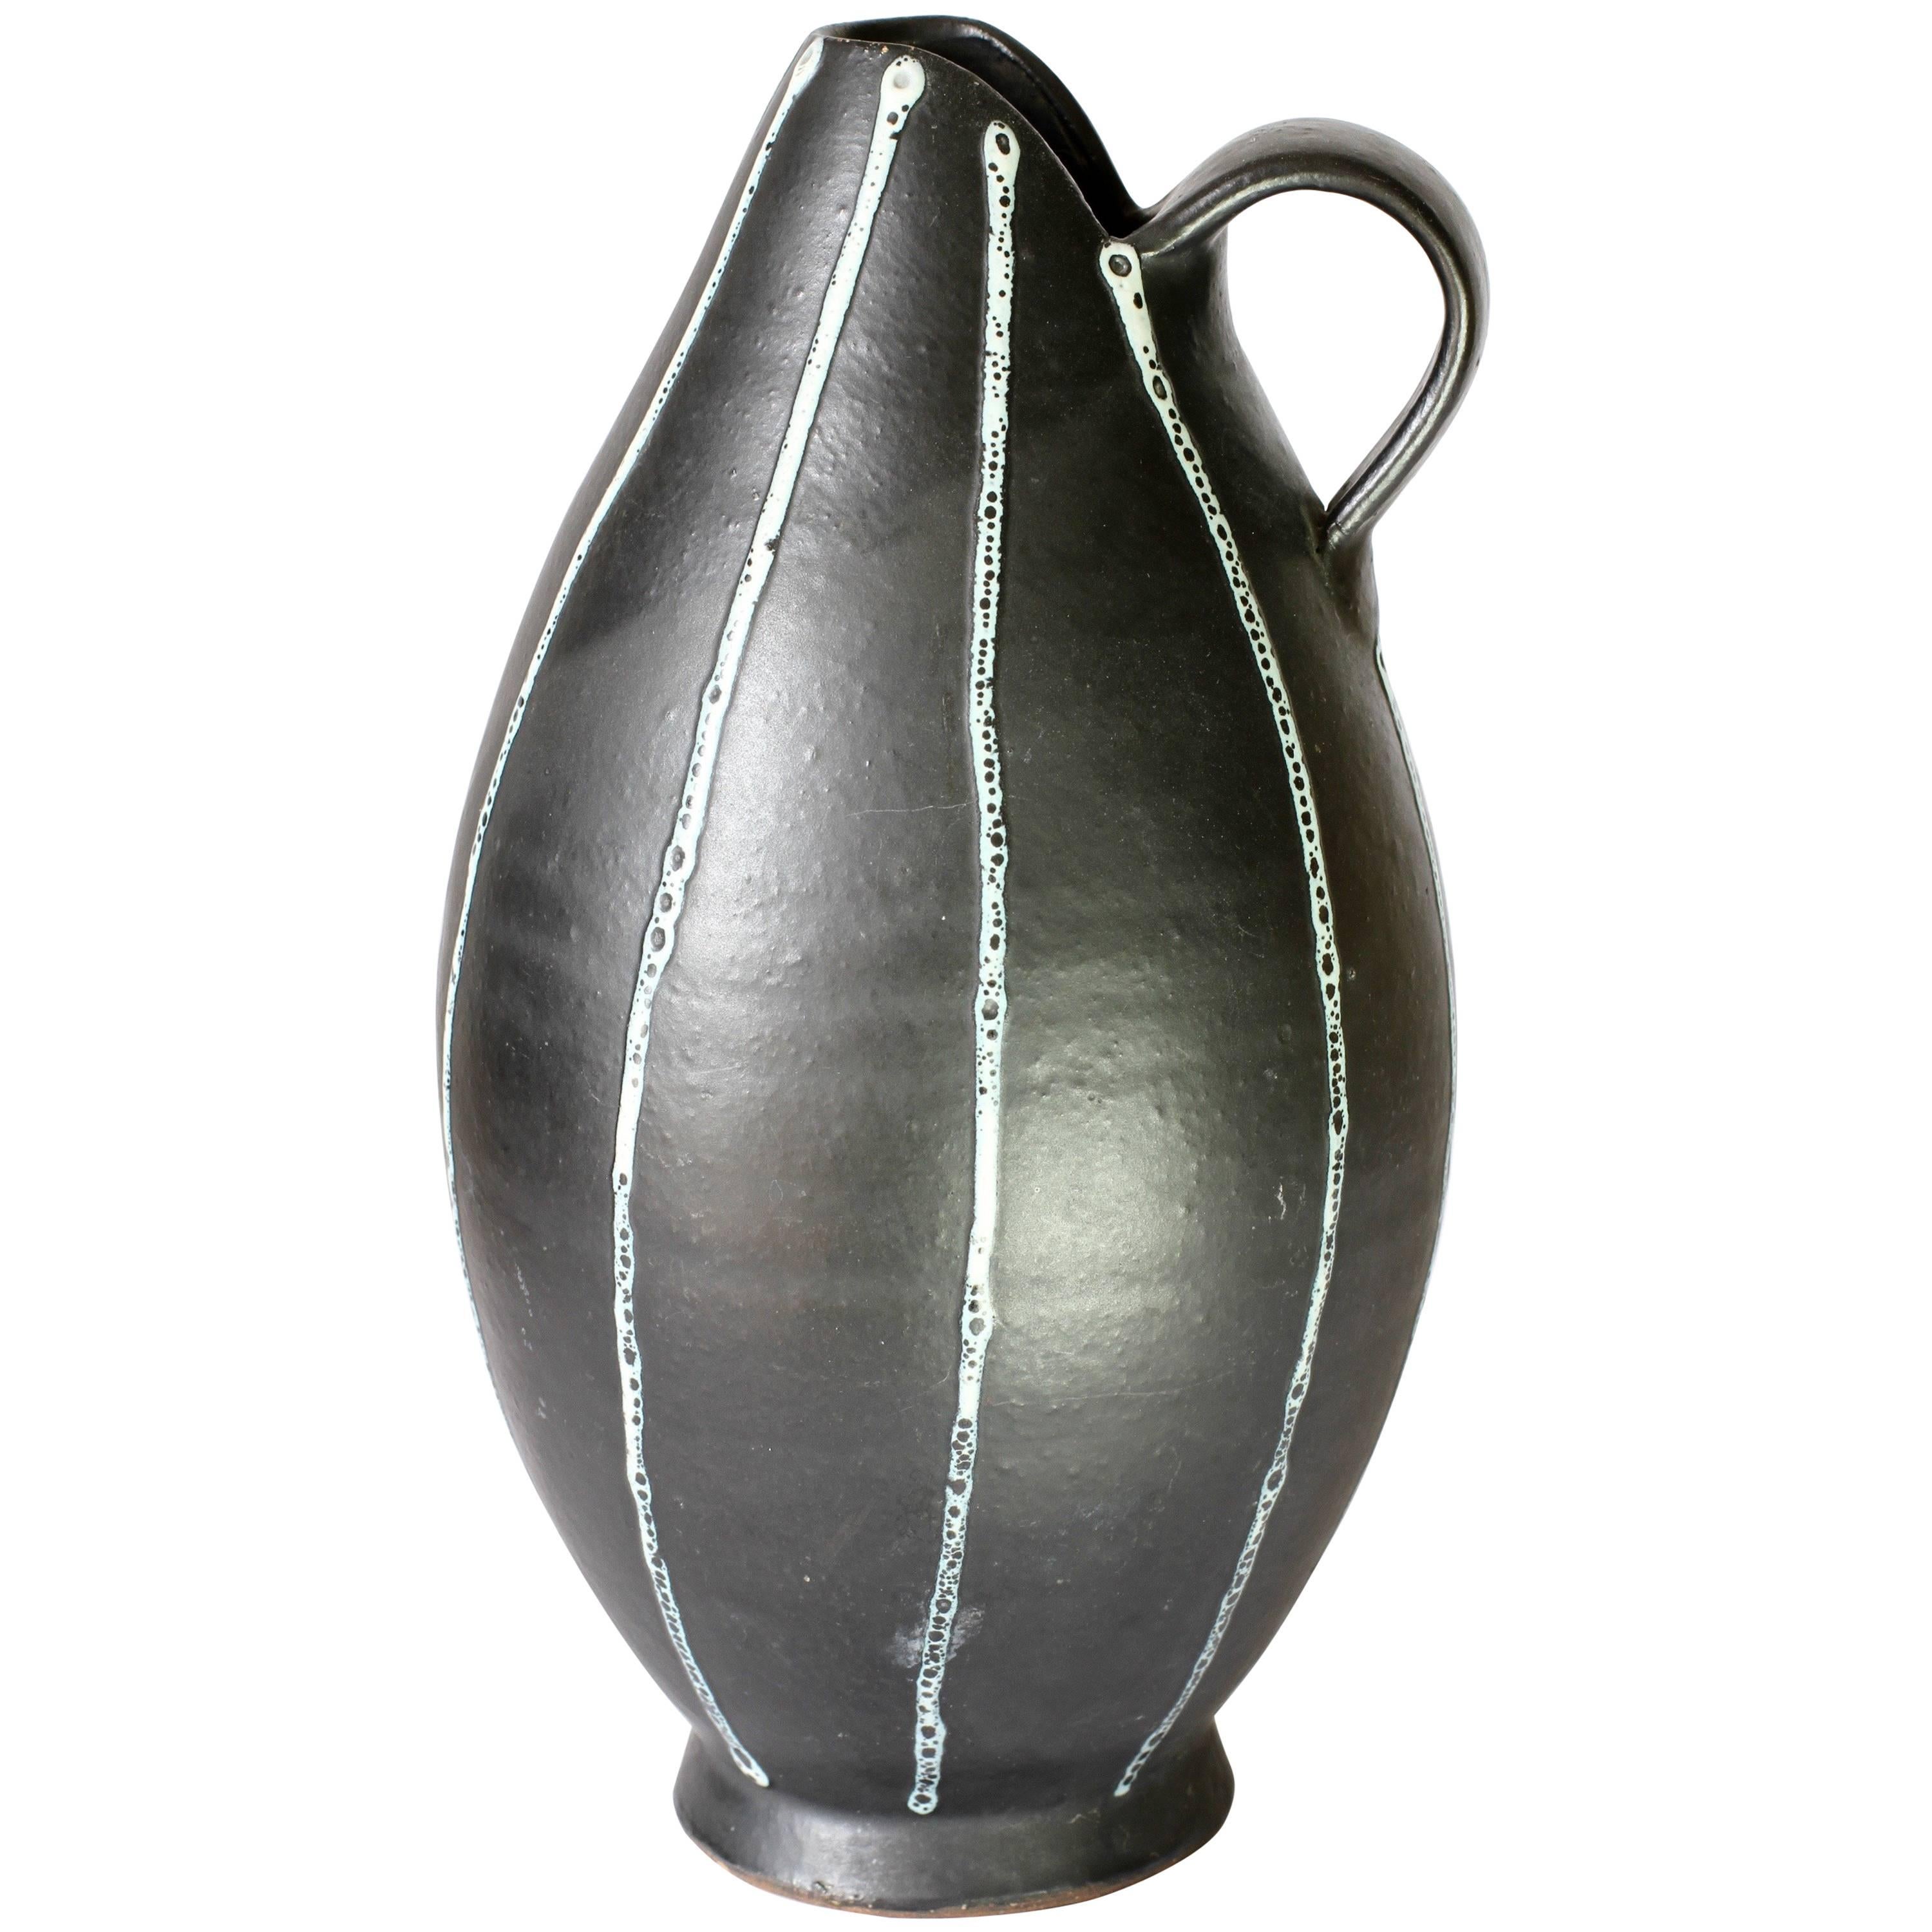 Elegant jug or pitcher, hand thrown by an unknown studio potter, circa 1950-1959. It is certainly of European origin and most likely German made as it has very similar glaze techniques to those found on vases from the West German Pottery companies